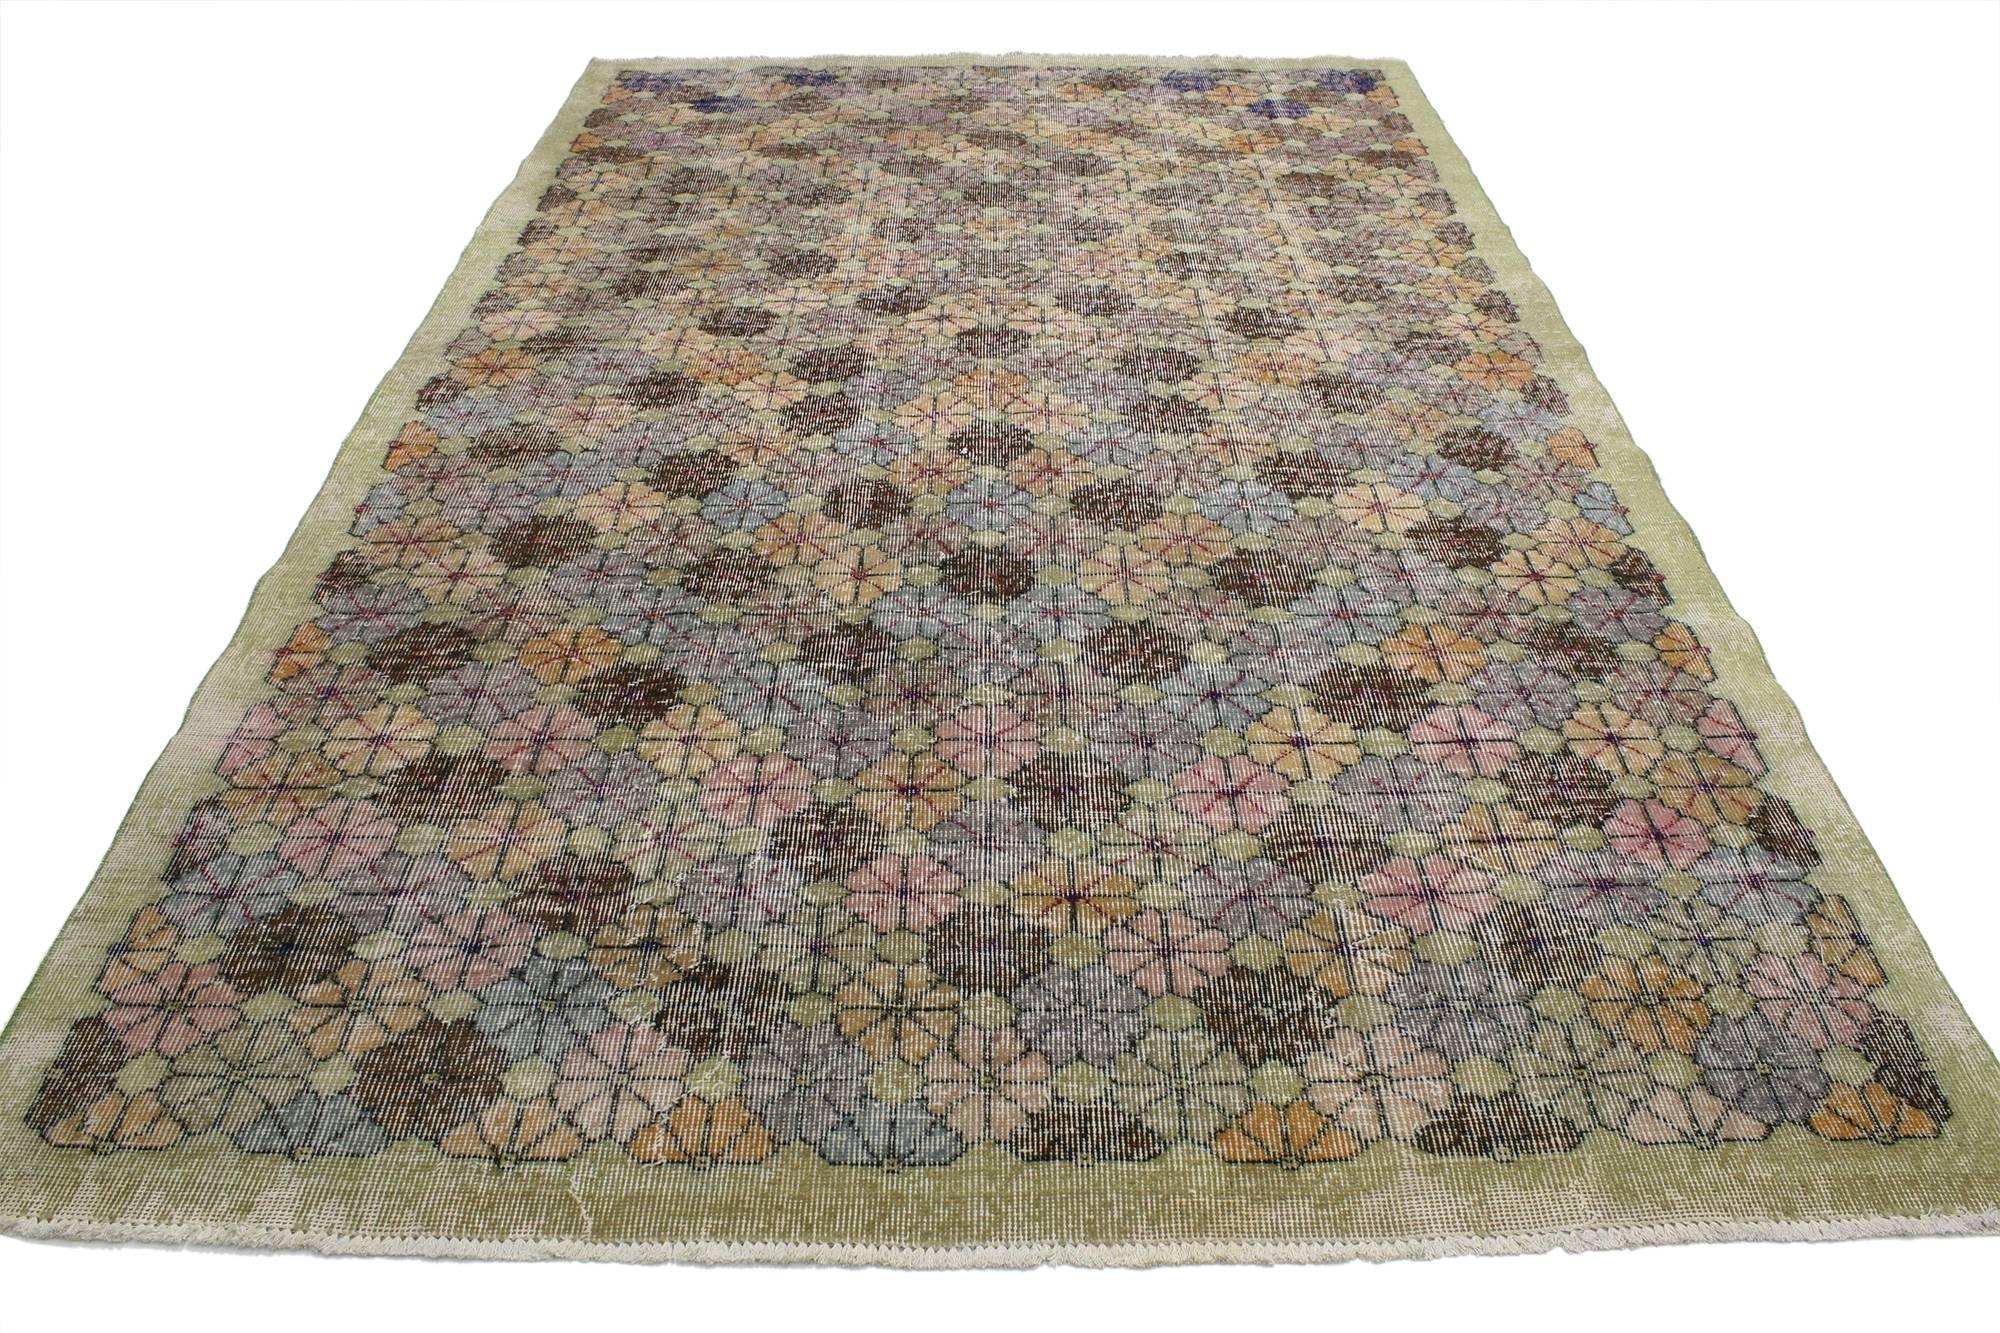 52023 Zeki Muren distressed vintage Turkish Sivas rug with Industrial Art Deco style. With its lively all-over geometric pattern and Industrial Art Deco style, this distressed vintage Turkish Sivas rug is easy to love. The all-over geometric